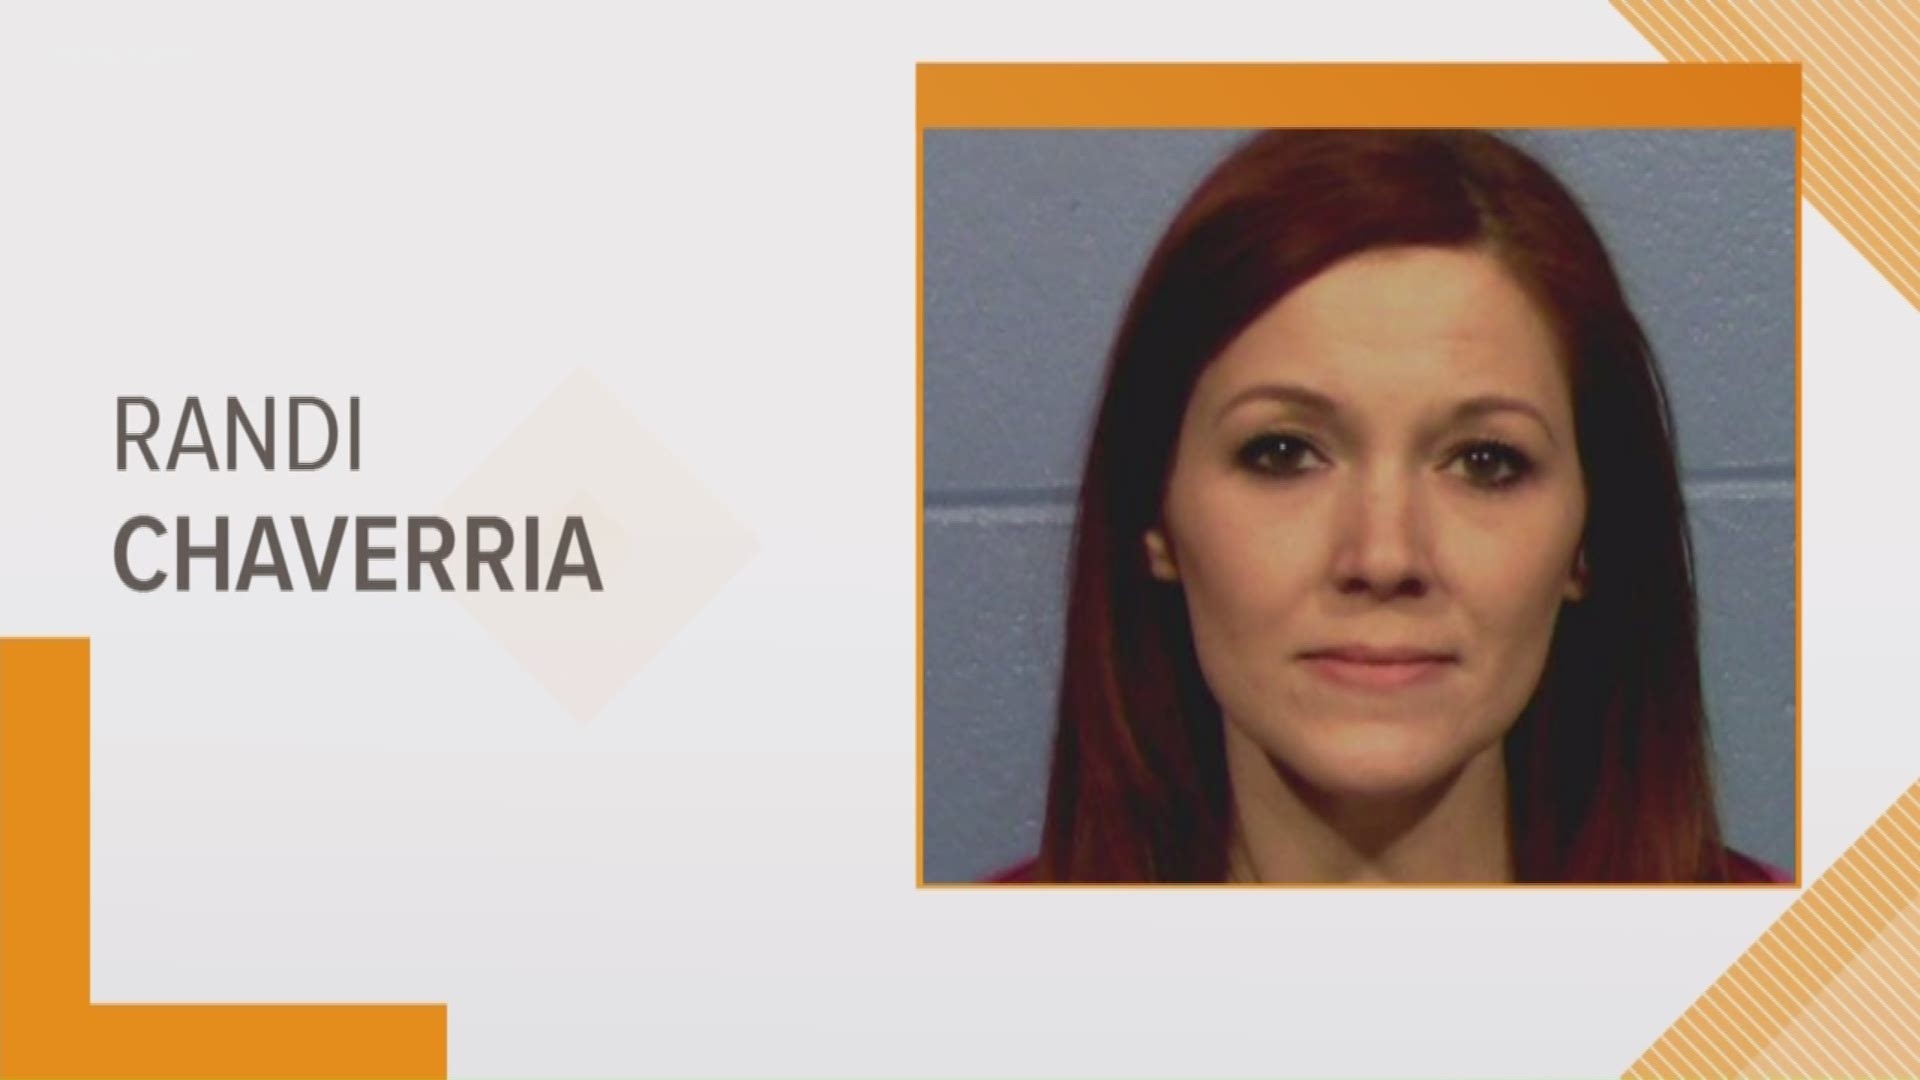 According to online jail records, Randi Chaverria bonded out of jail as of Tuesday afternoon.